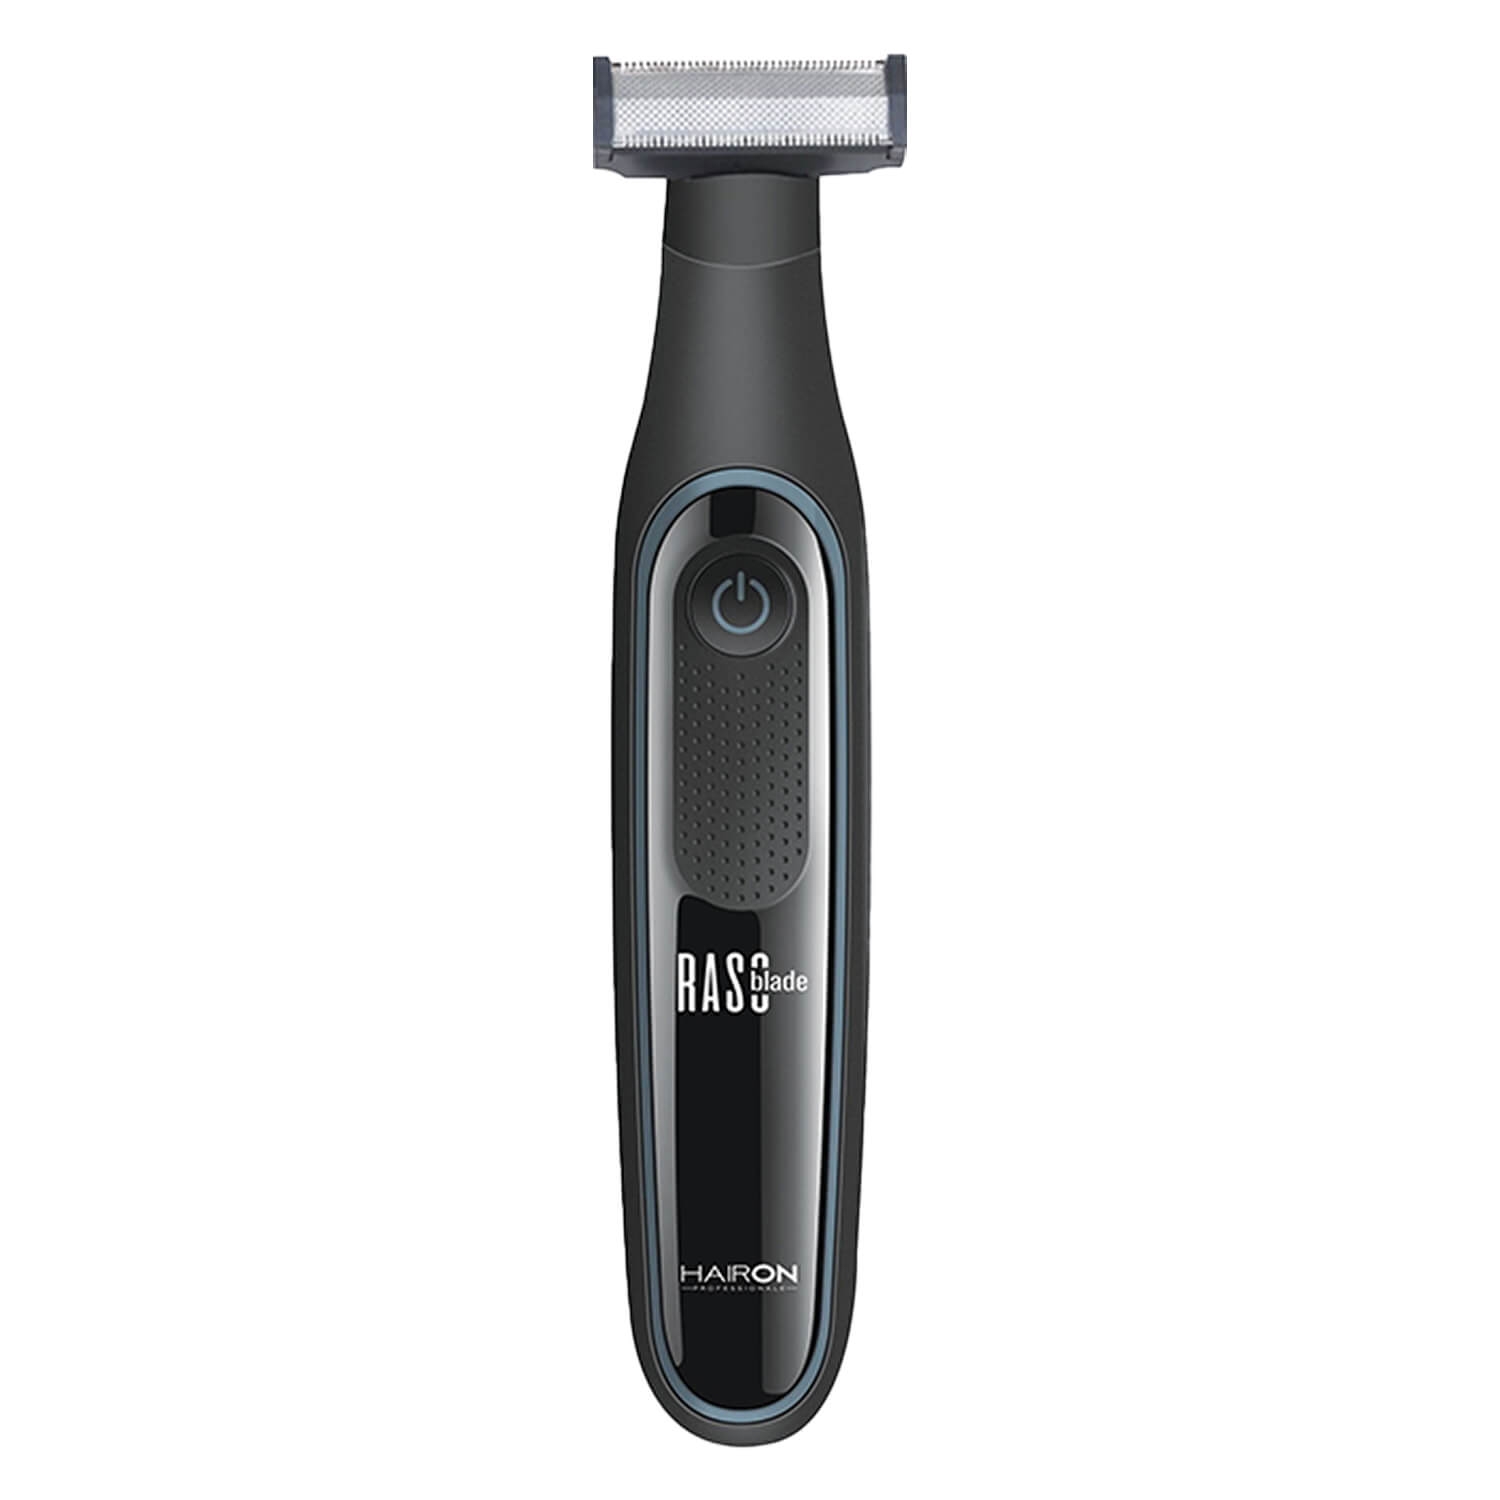 Product image from HAIRON - Raso Blade Shaver